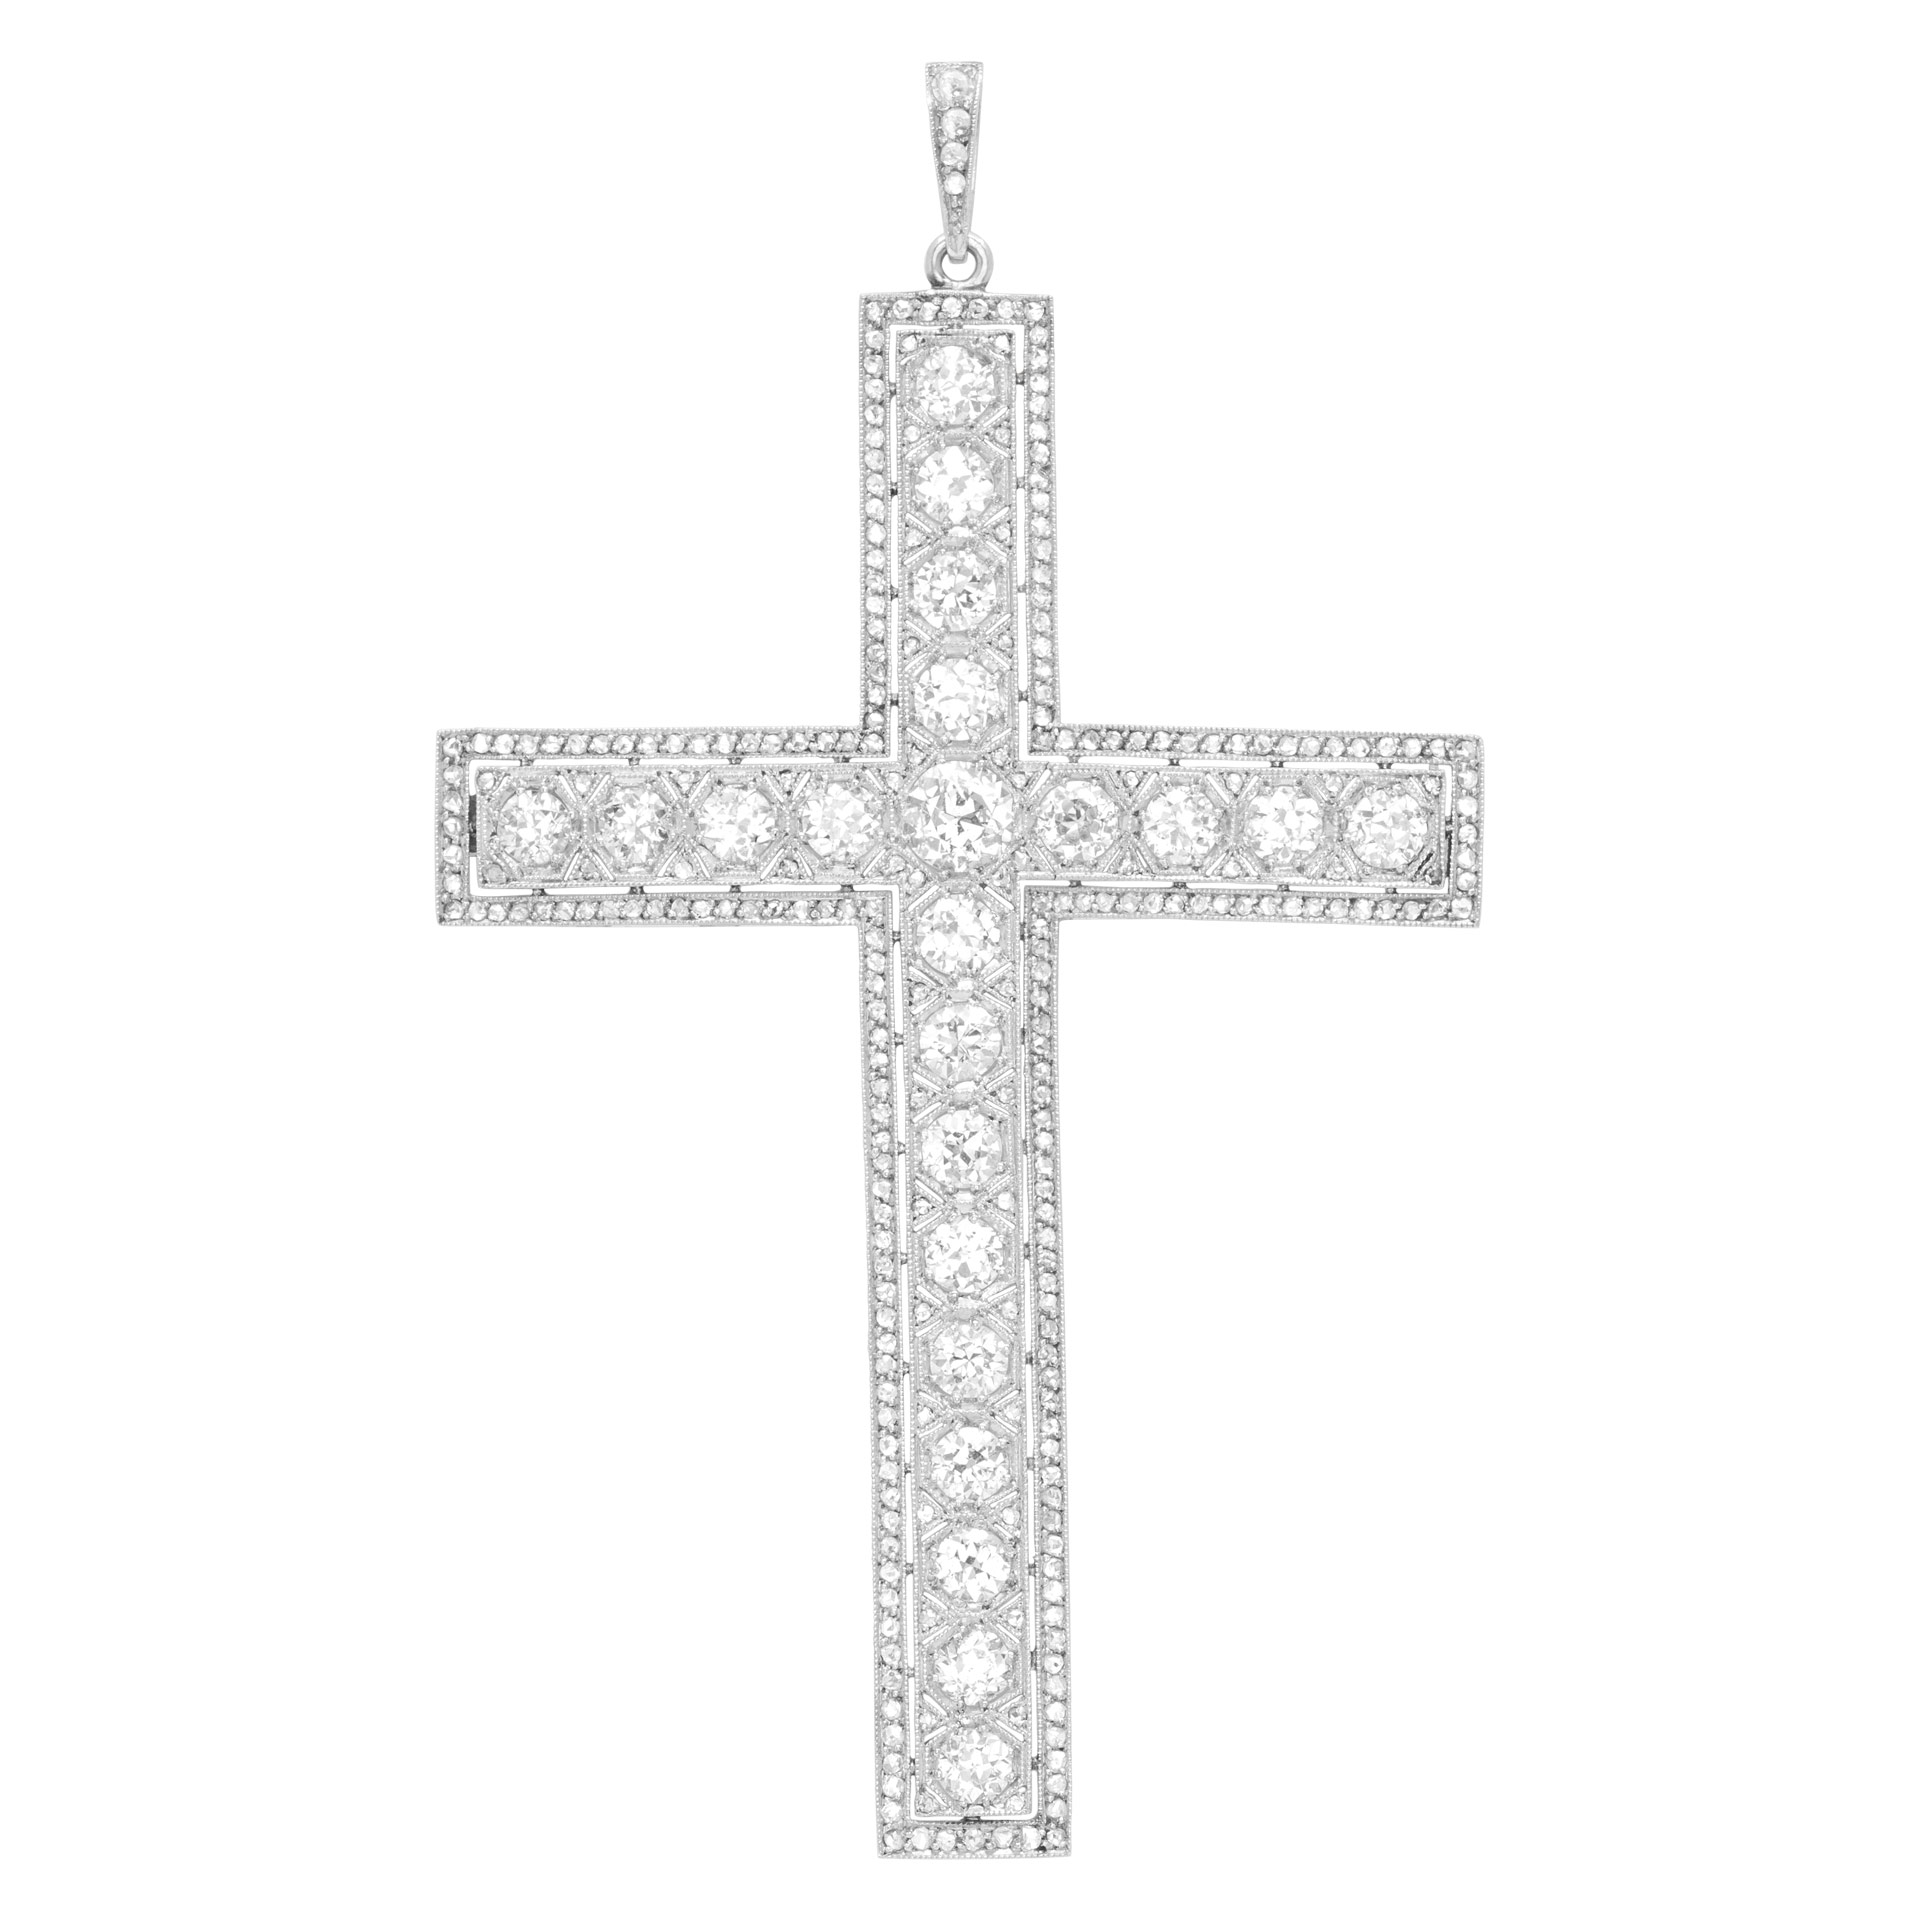 Timeless diamond cross pendant in platinum with total diamond weight 5.5 carats